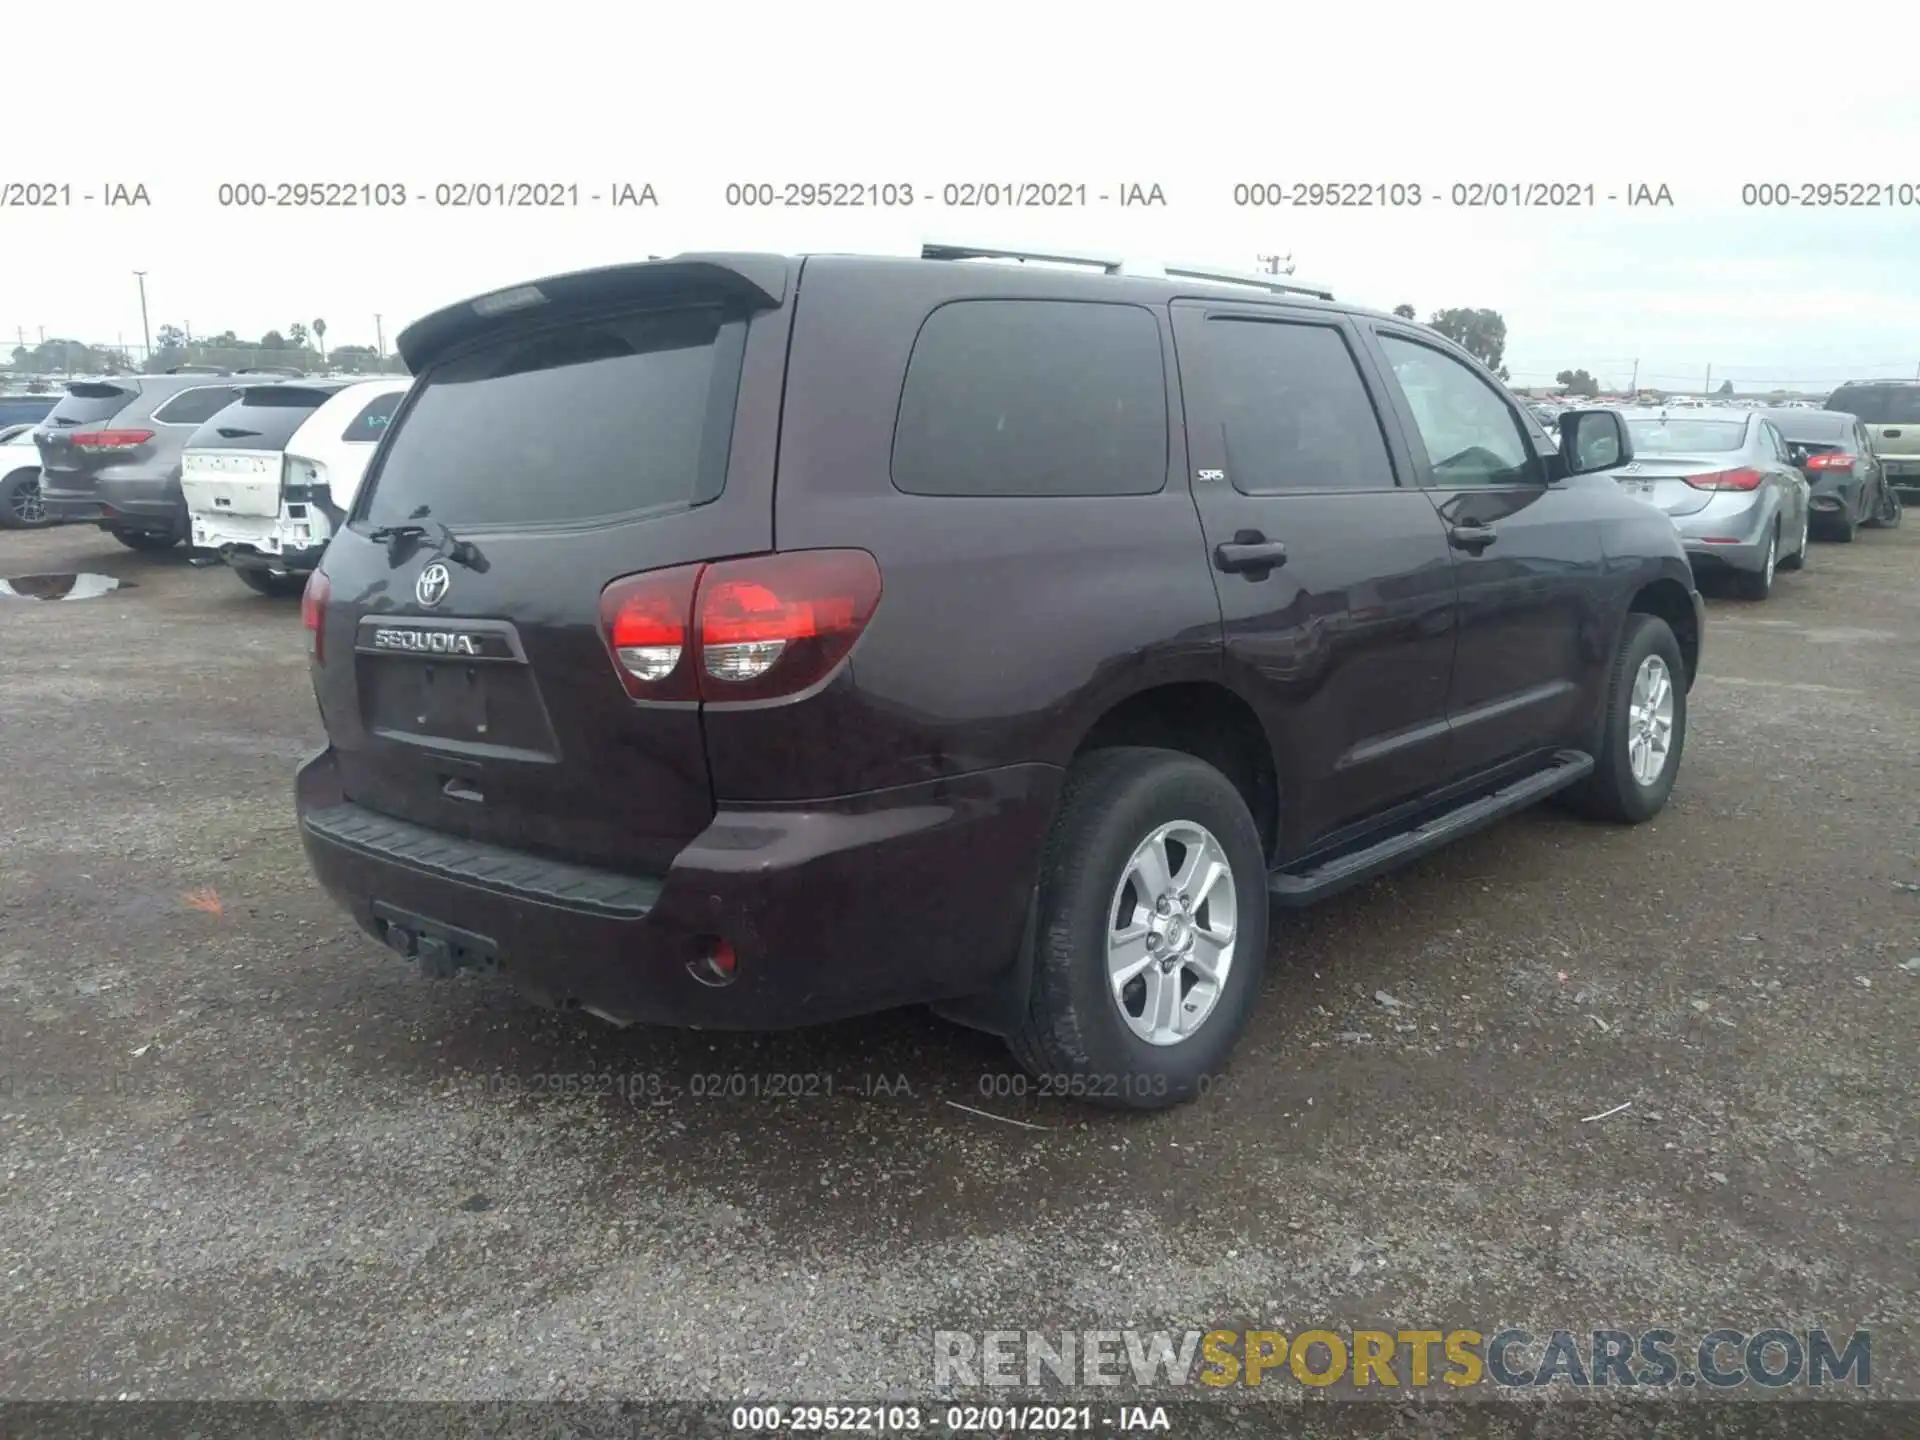 4 Photograph of a damaged car 5TDBY5G16KS173468 TOYOTA SEQUOIA 2019